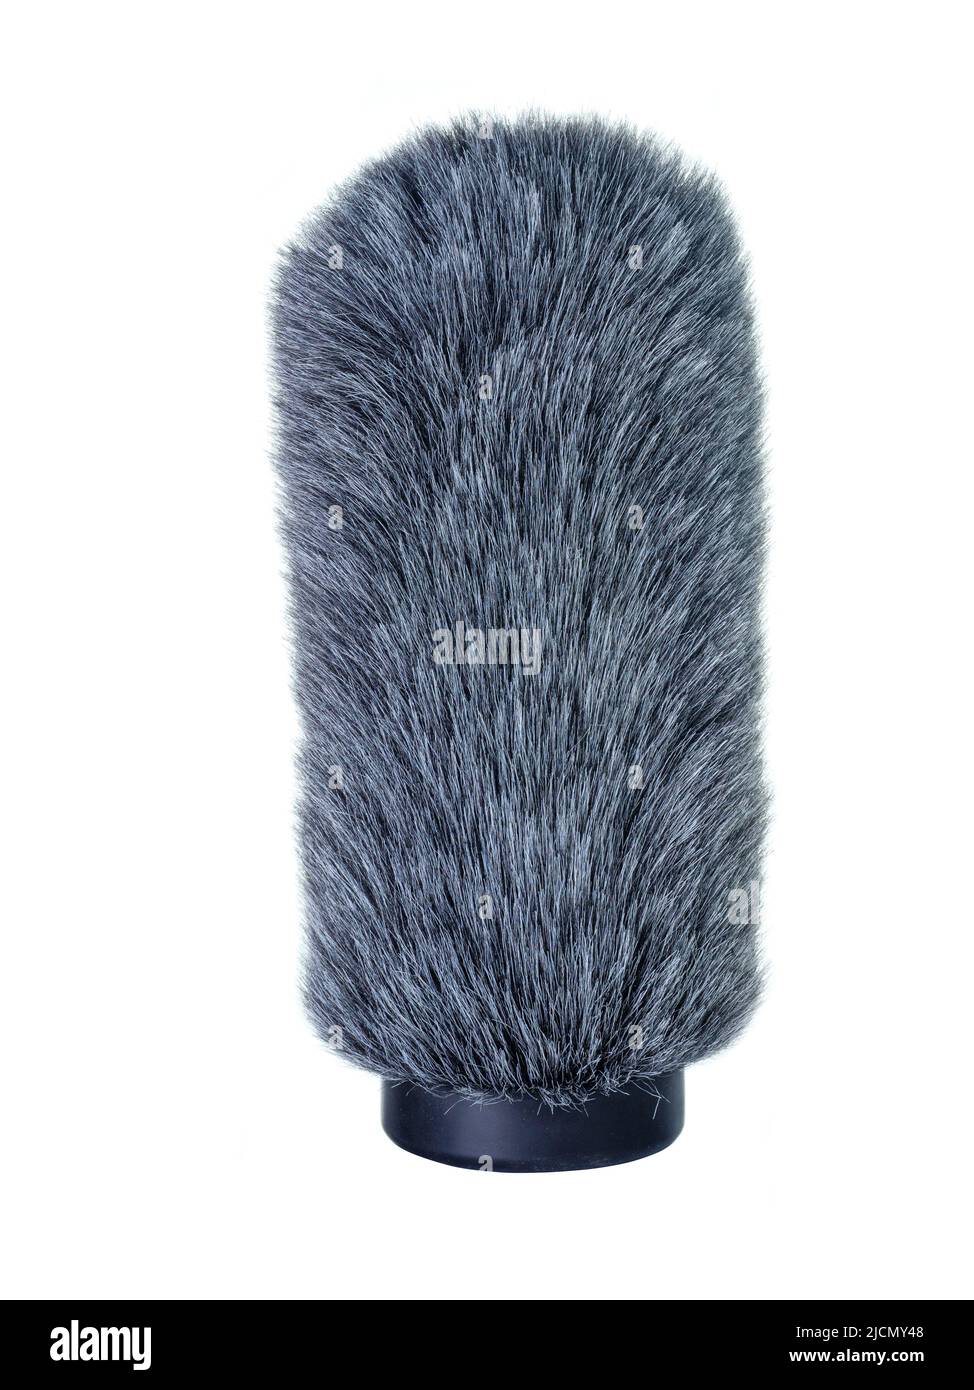 Fur windshield for microphone gun isolated on white background Stock Photo